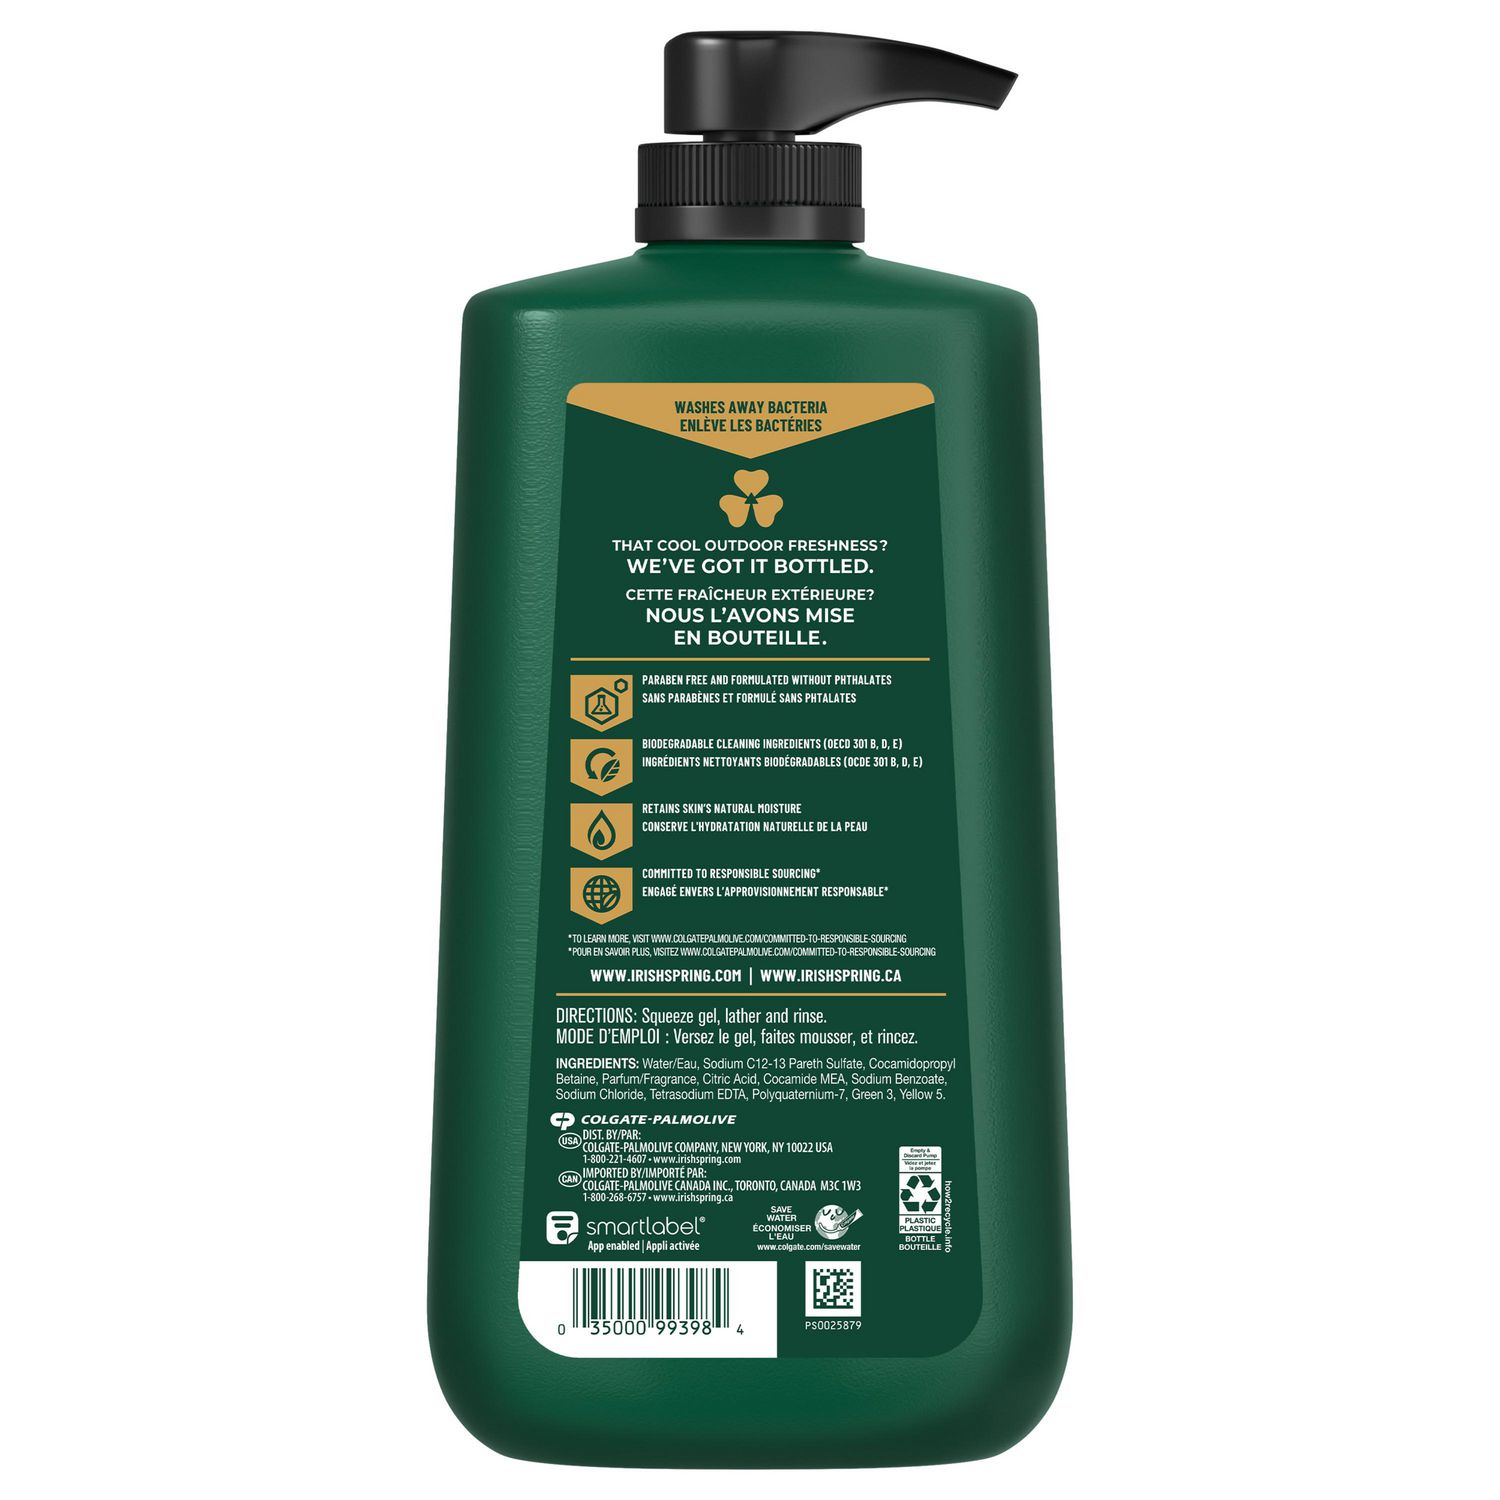 Tru Eco - Irish Made Eco-Friendly Household Cleaners with Refill